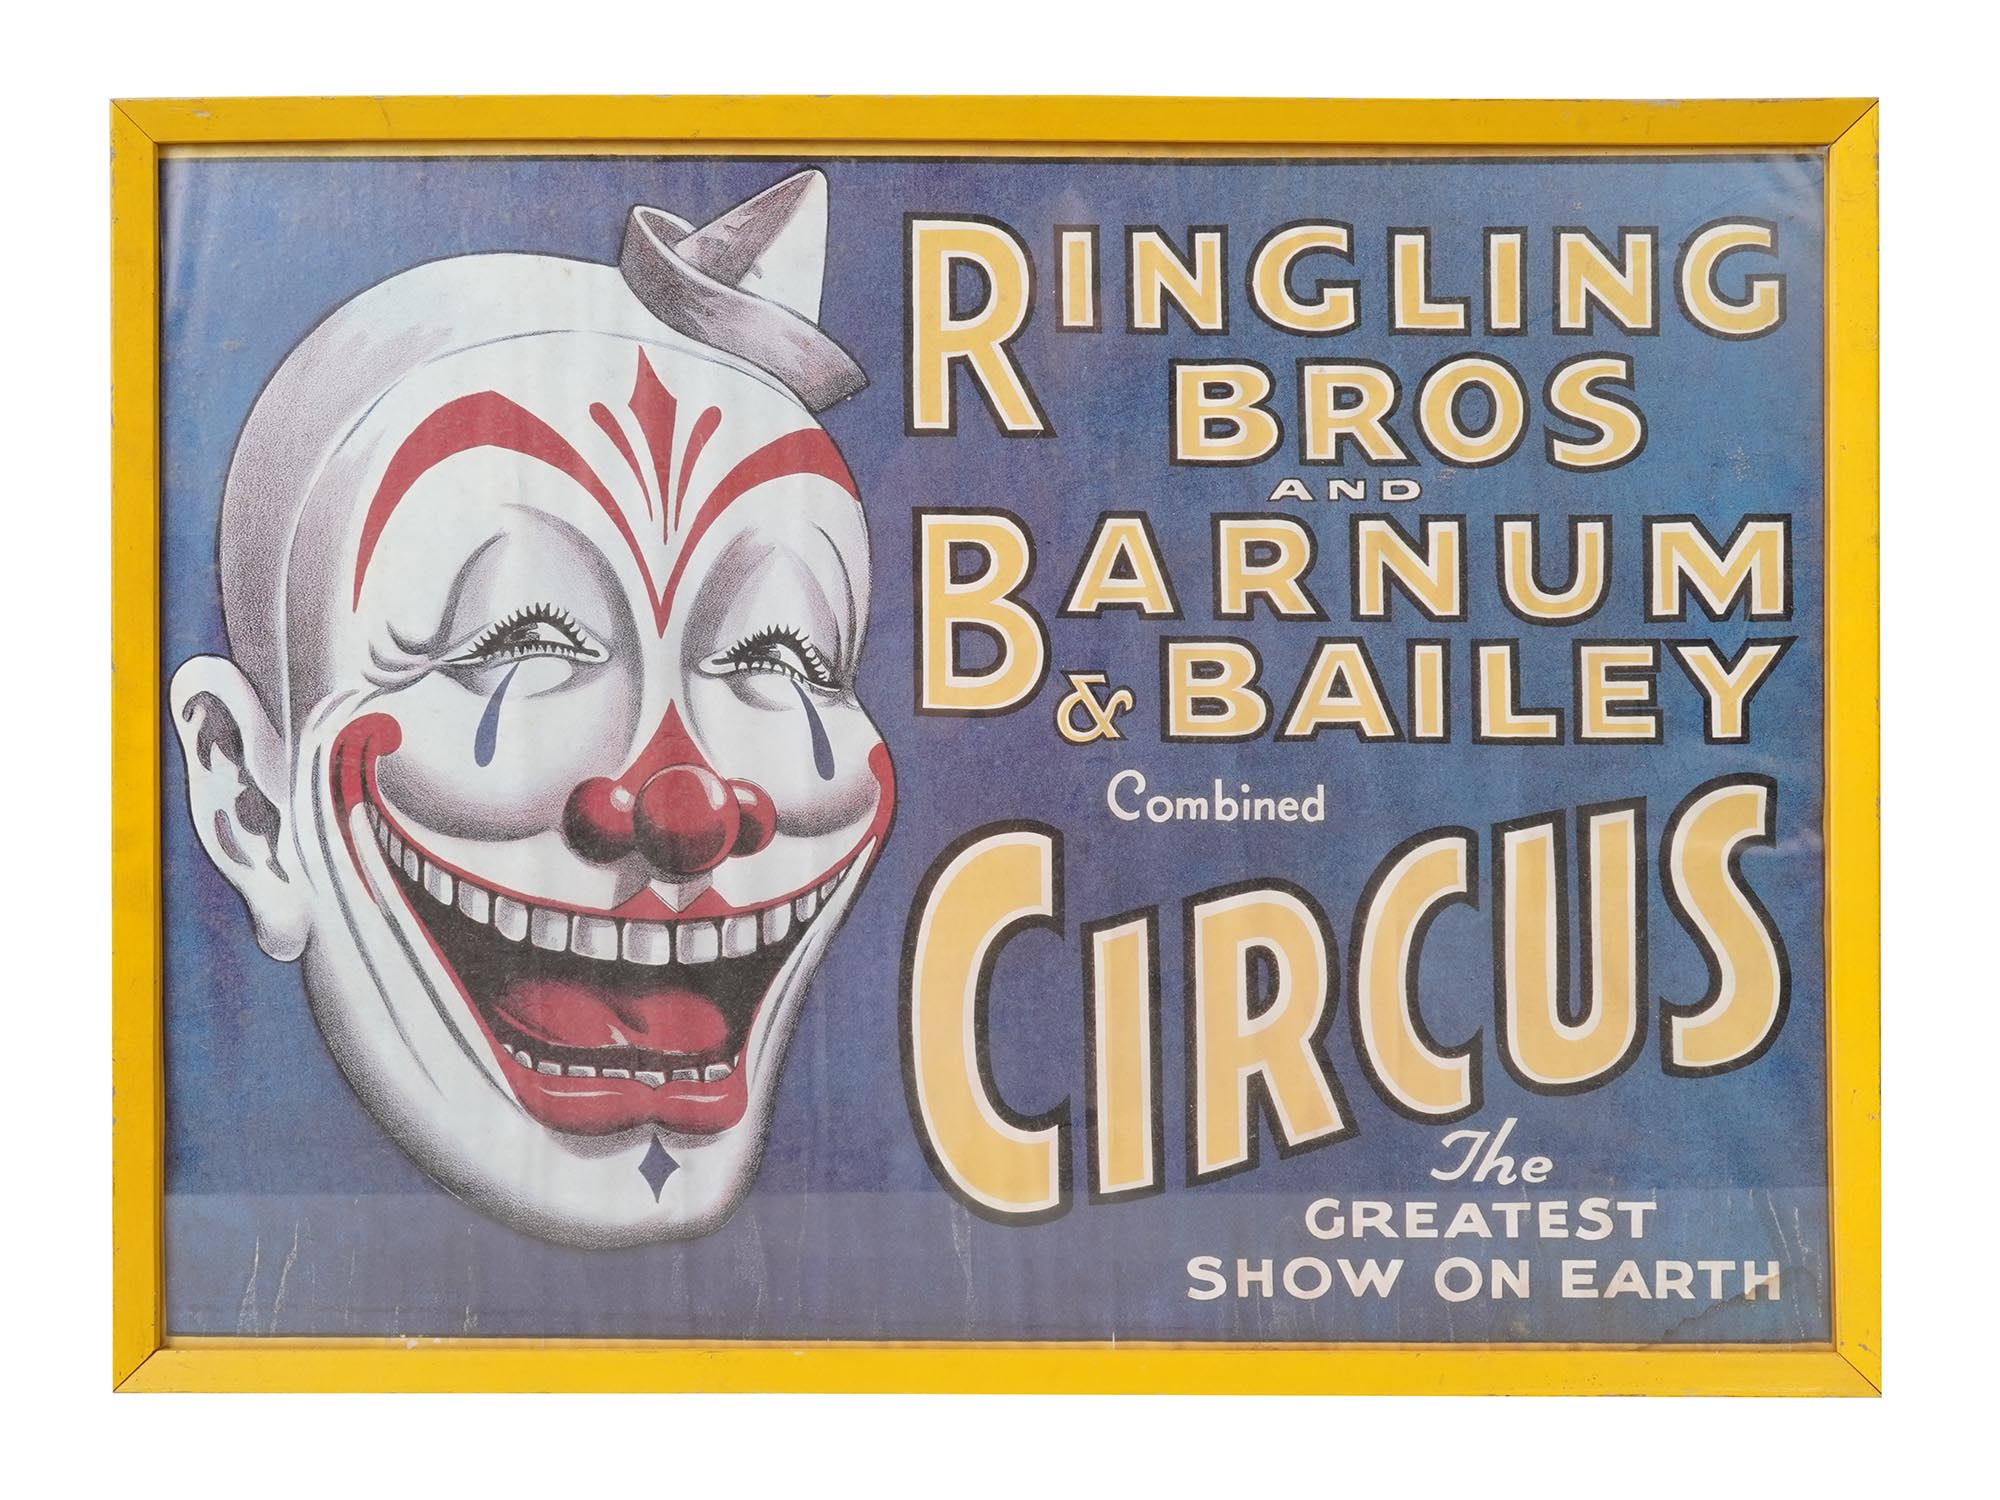 VINTAGE MID CENTURY RINGLING BROS CIRCUS POSTER PIC-0